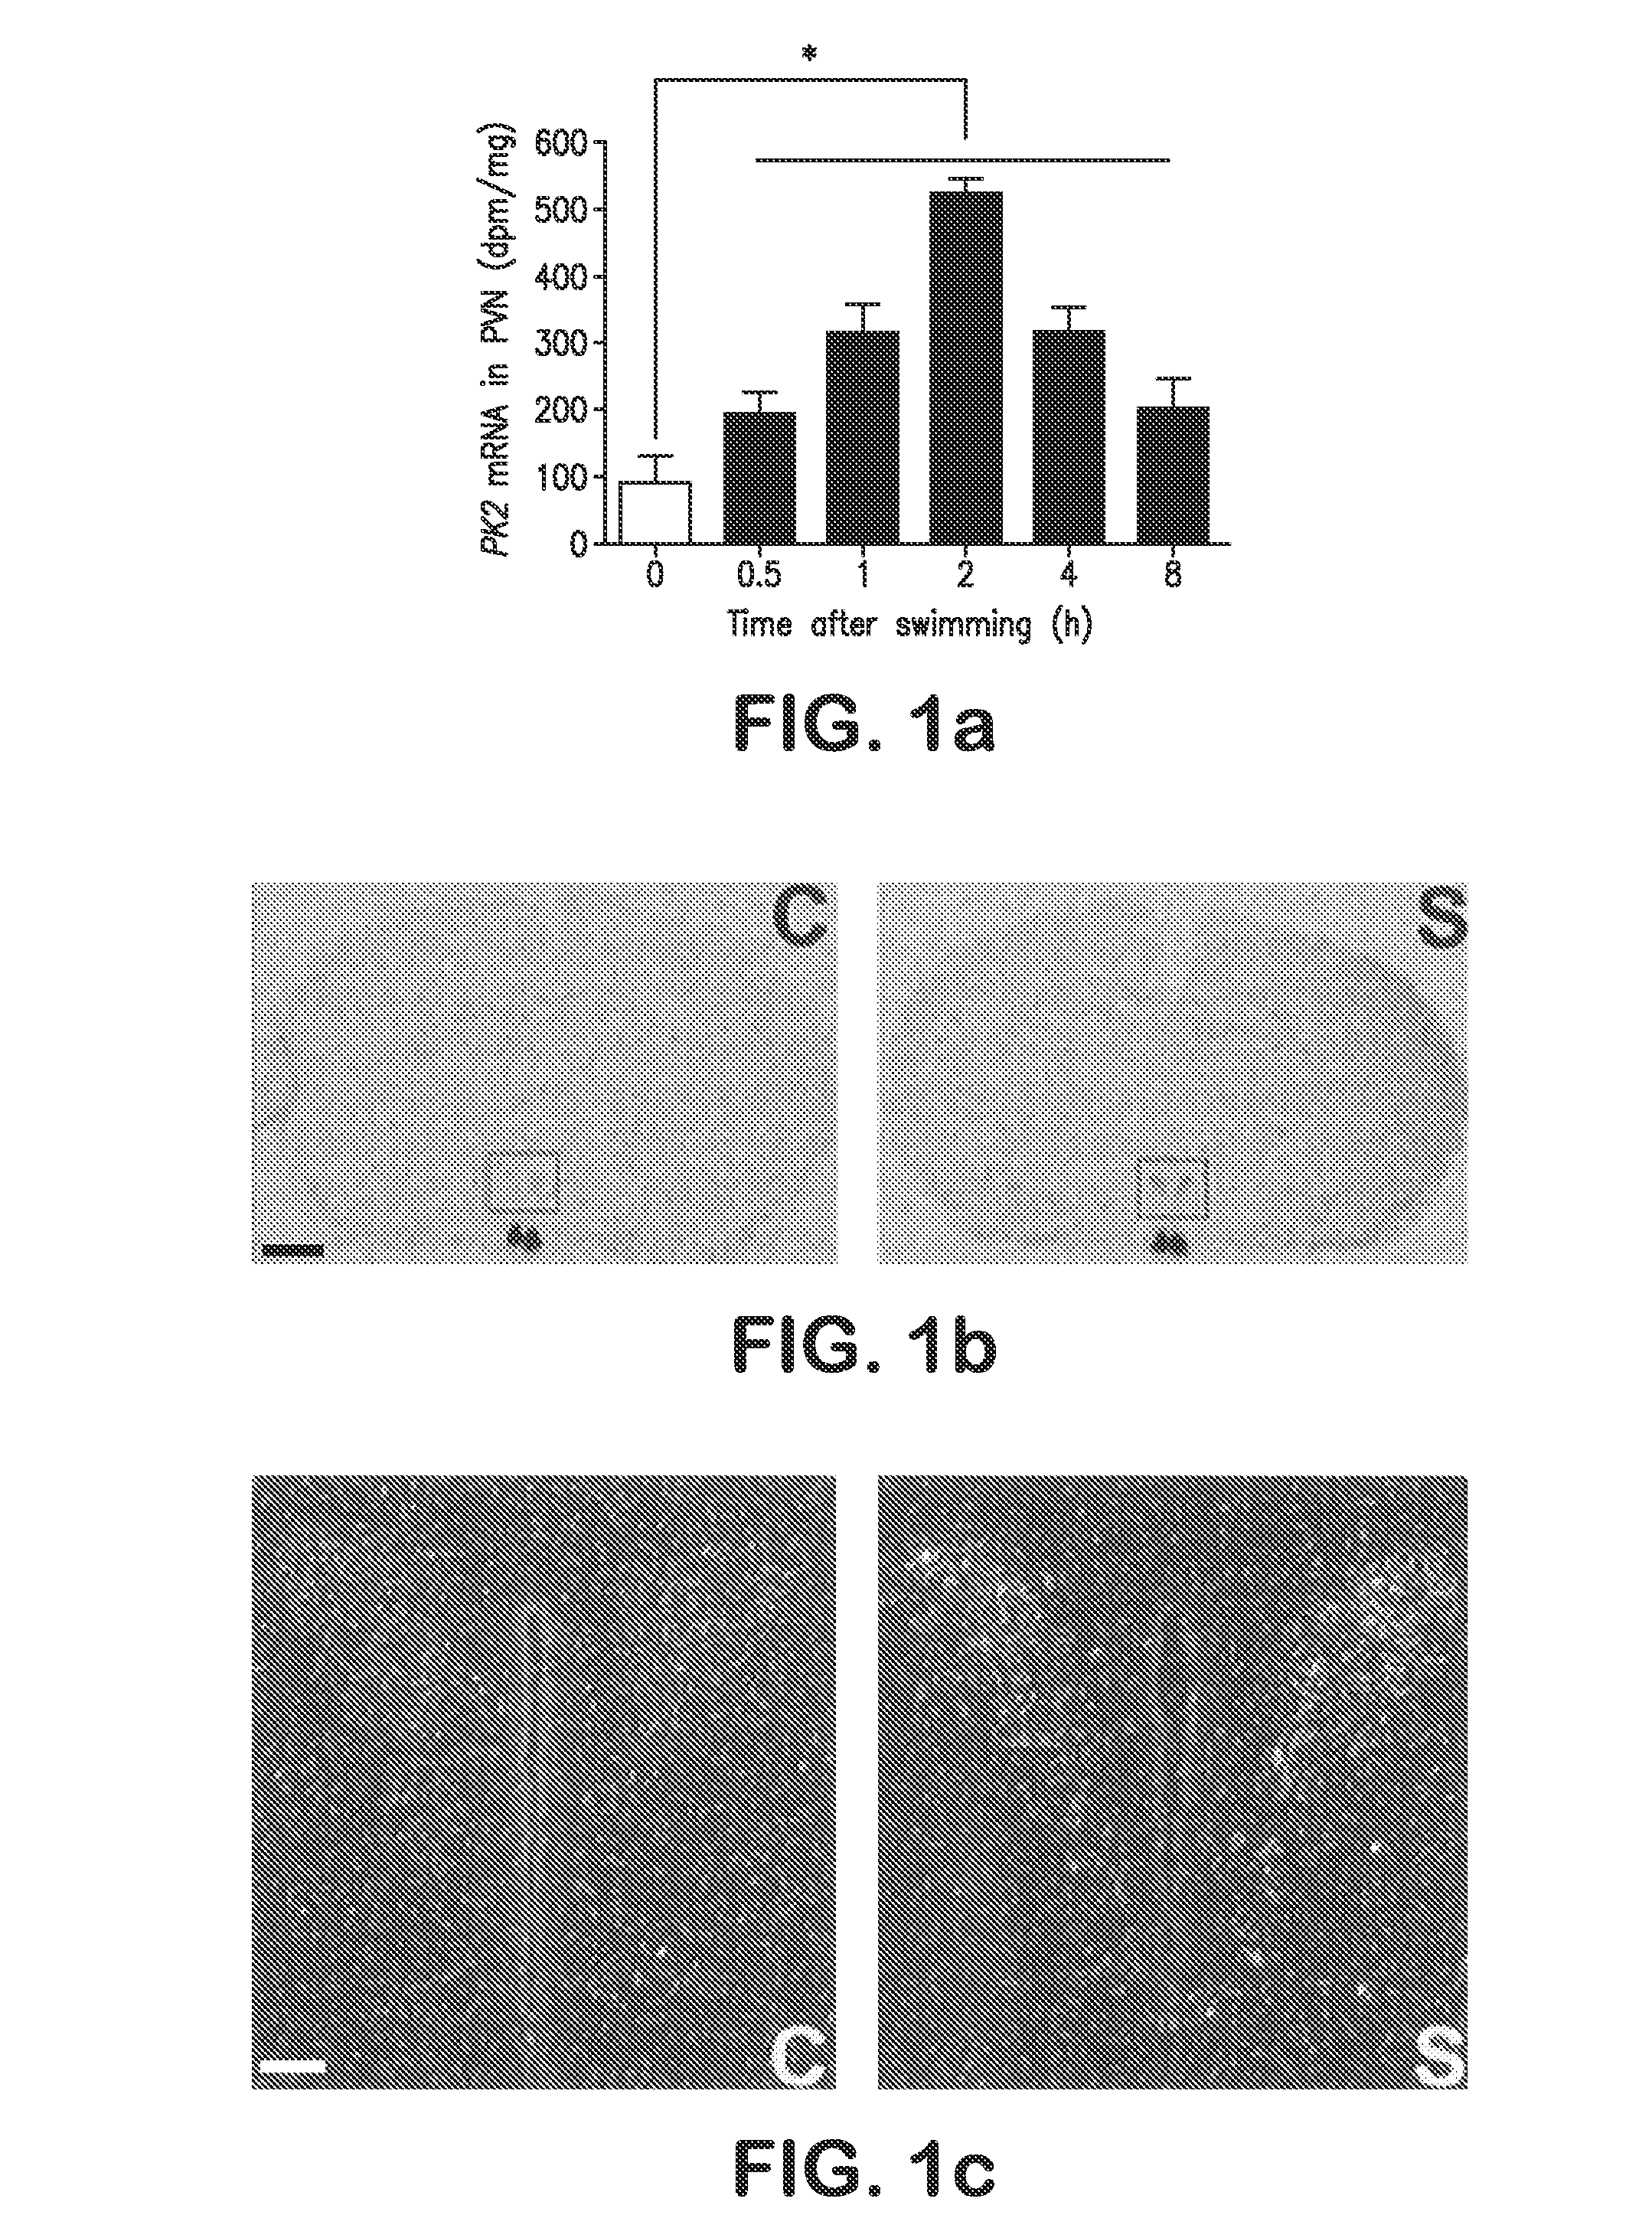 Methods of Modulating Prokineticin 2 for Treatment of Stress Response and Anxiety-Related Disorders